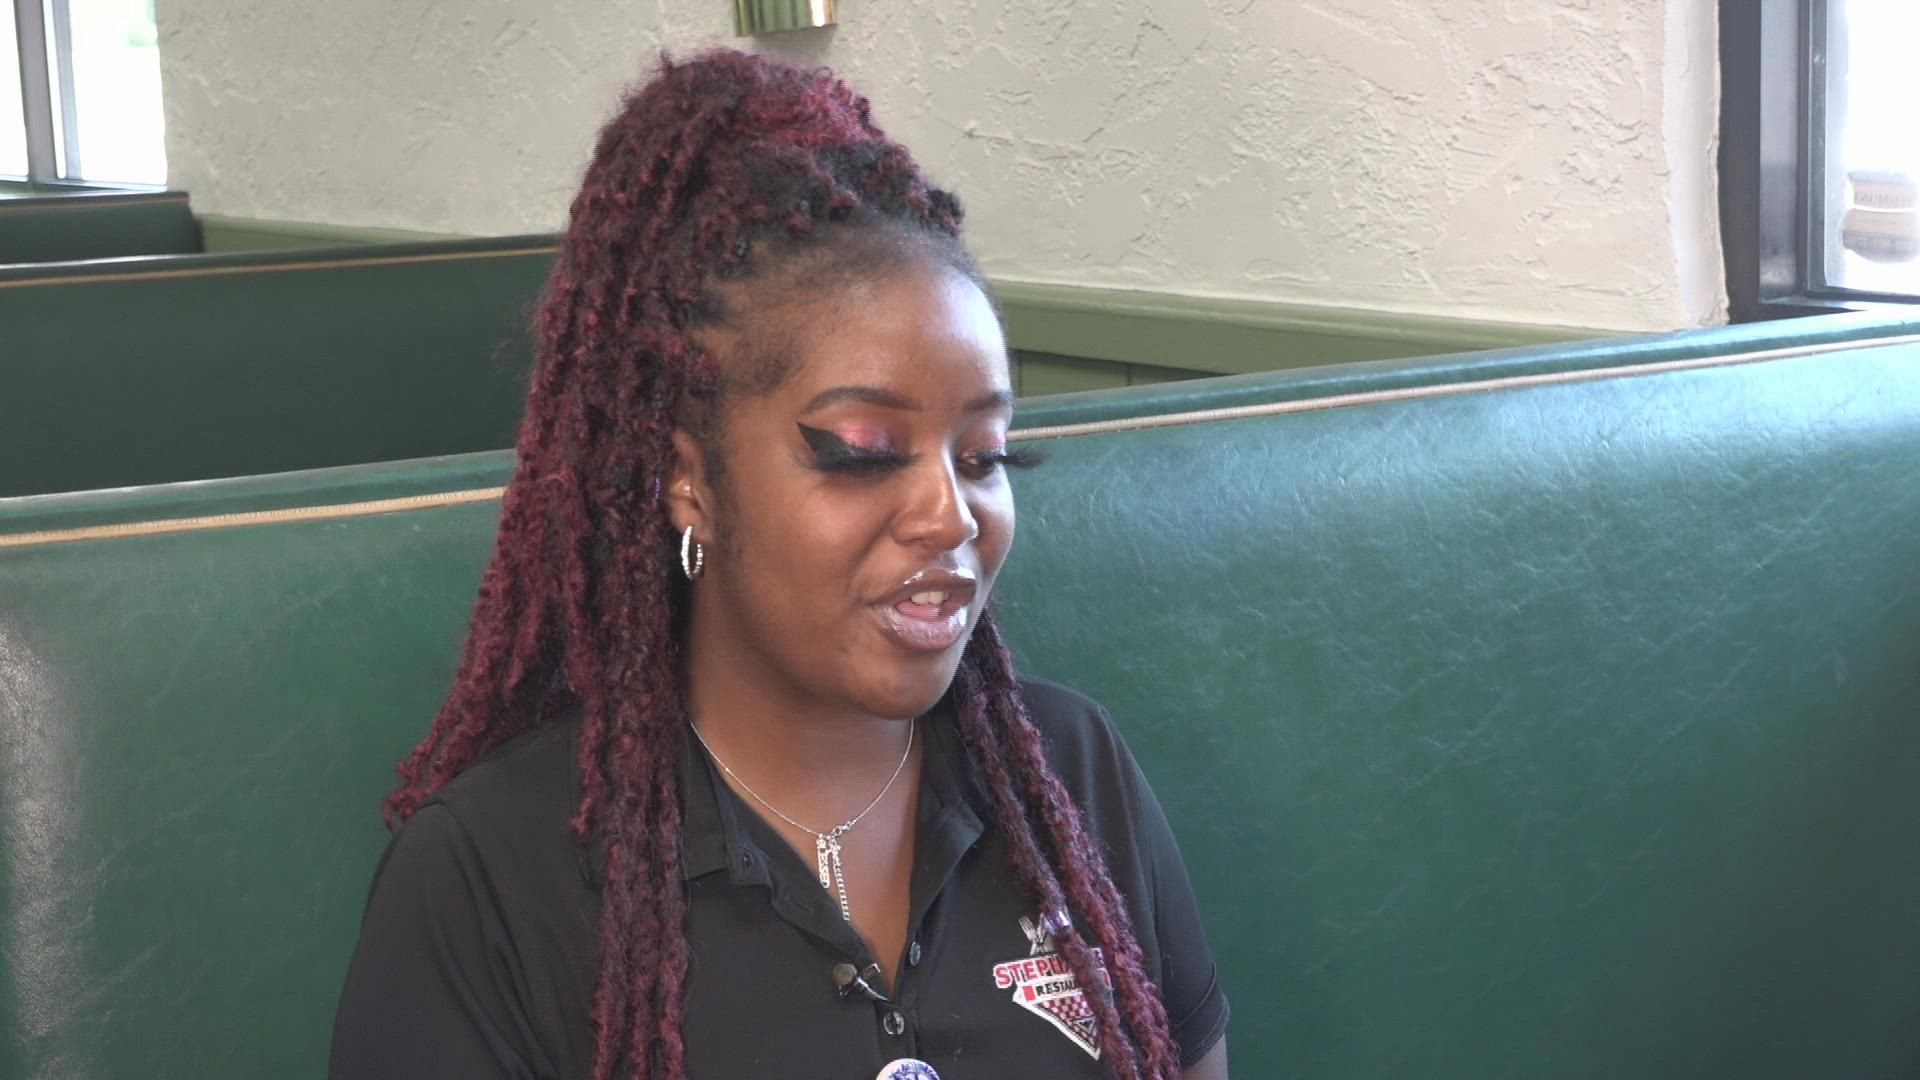 Najmah Monroe didn't know who her customer was while waiting tables at Stephanie's in Greensboro. It turned out to be former NFL wide receiver Chad Johnson.